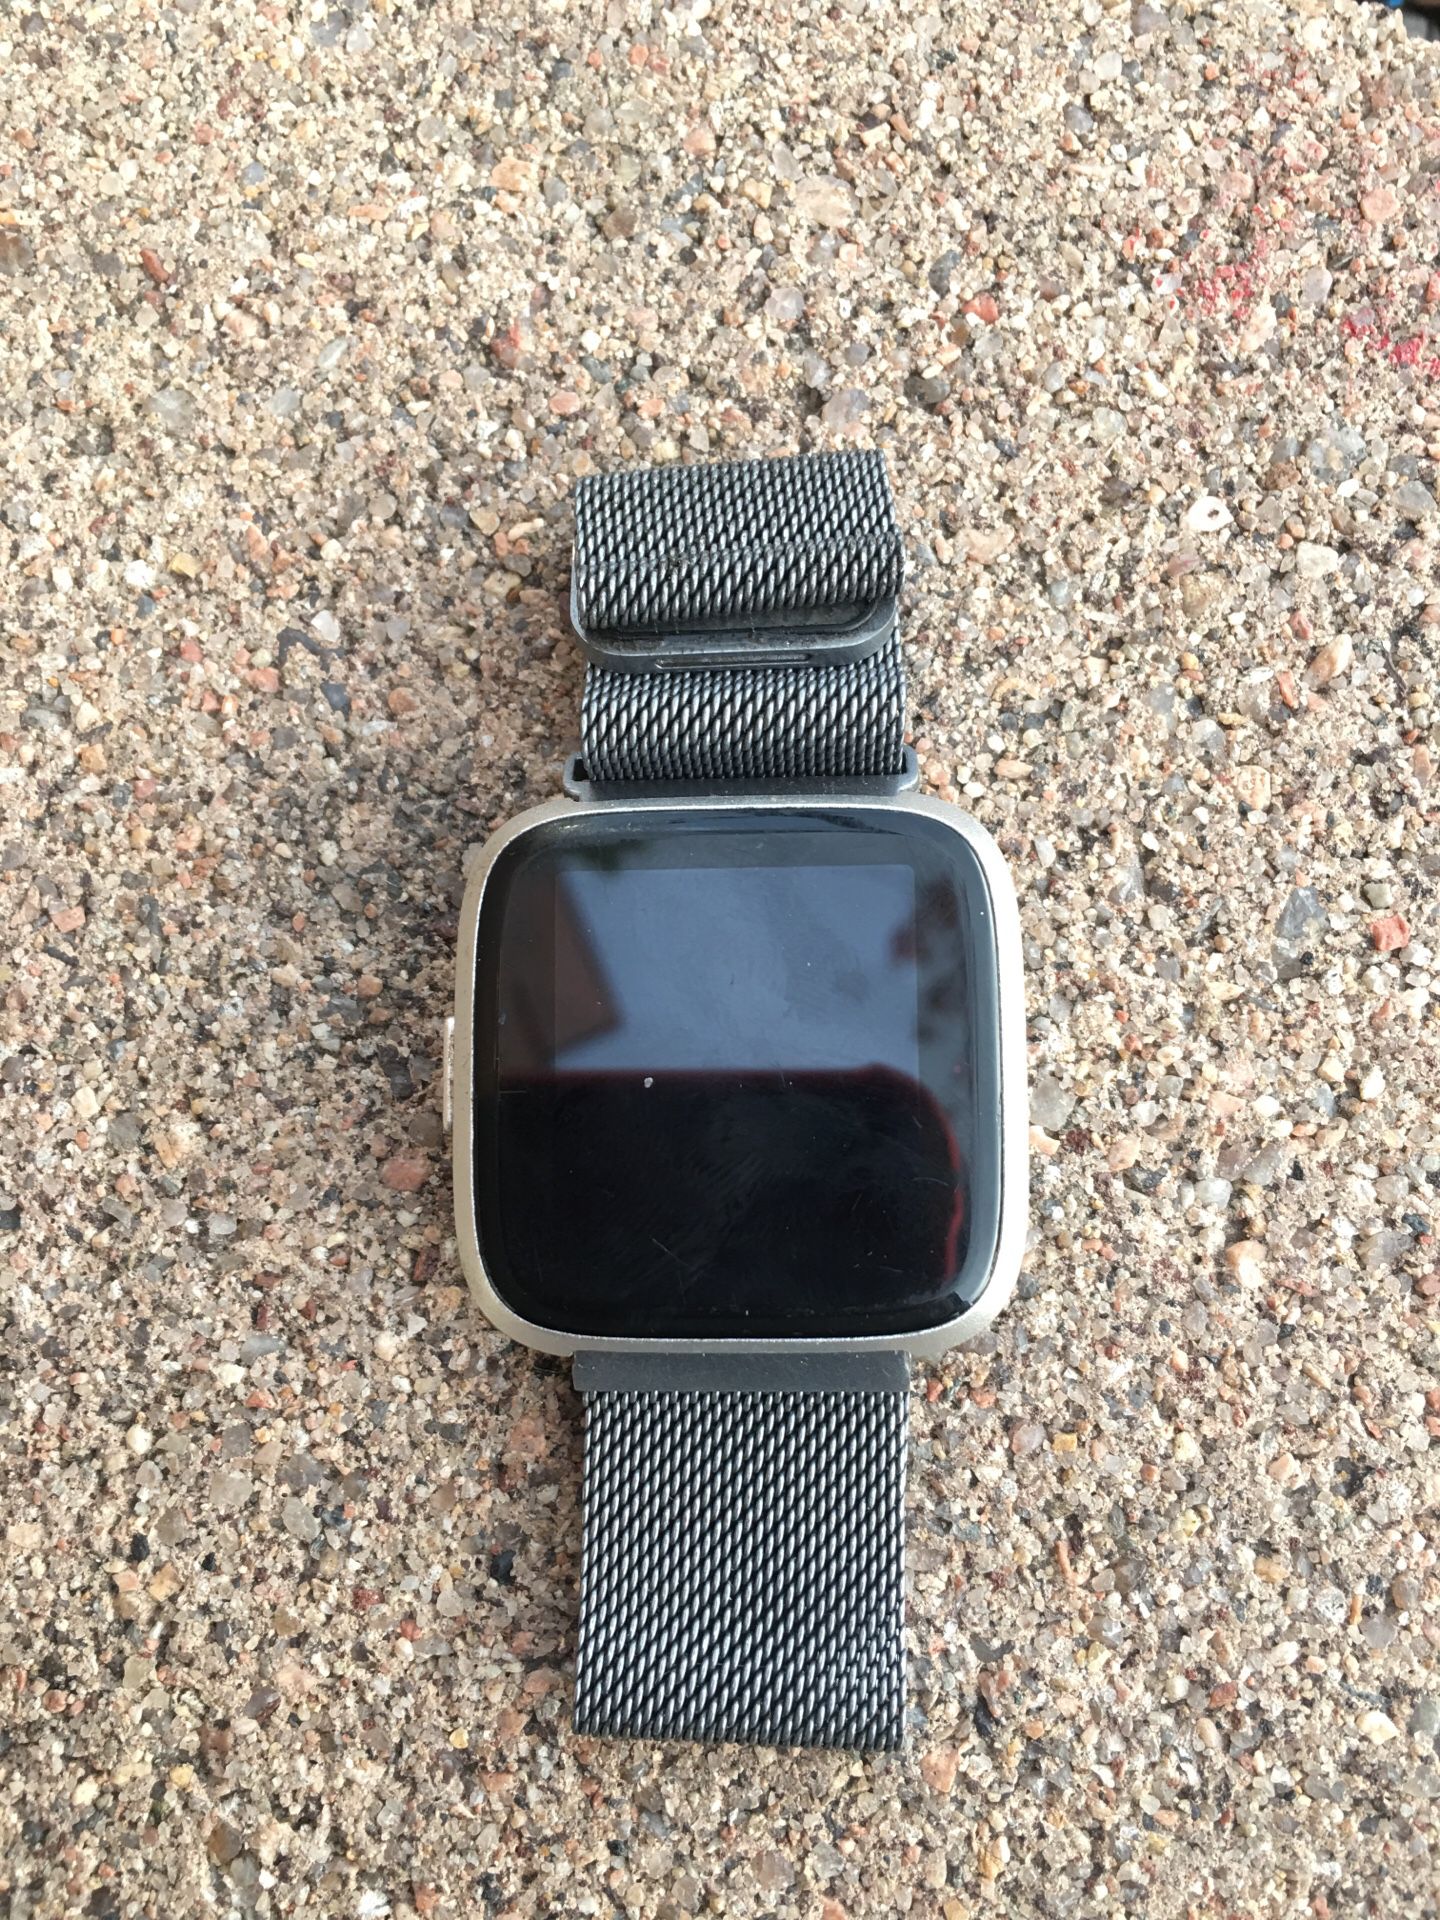 FITBIT VERSA USED BUT WORKS GREAT!!!